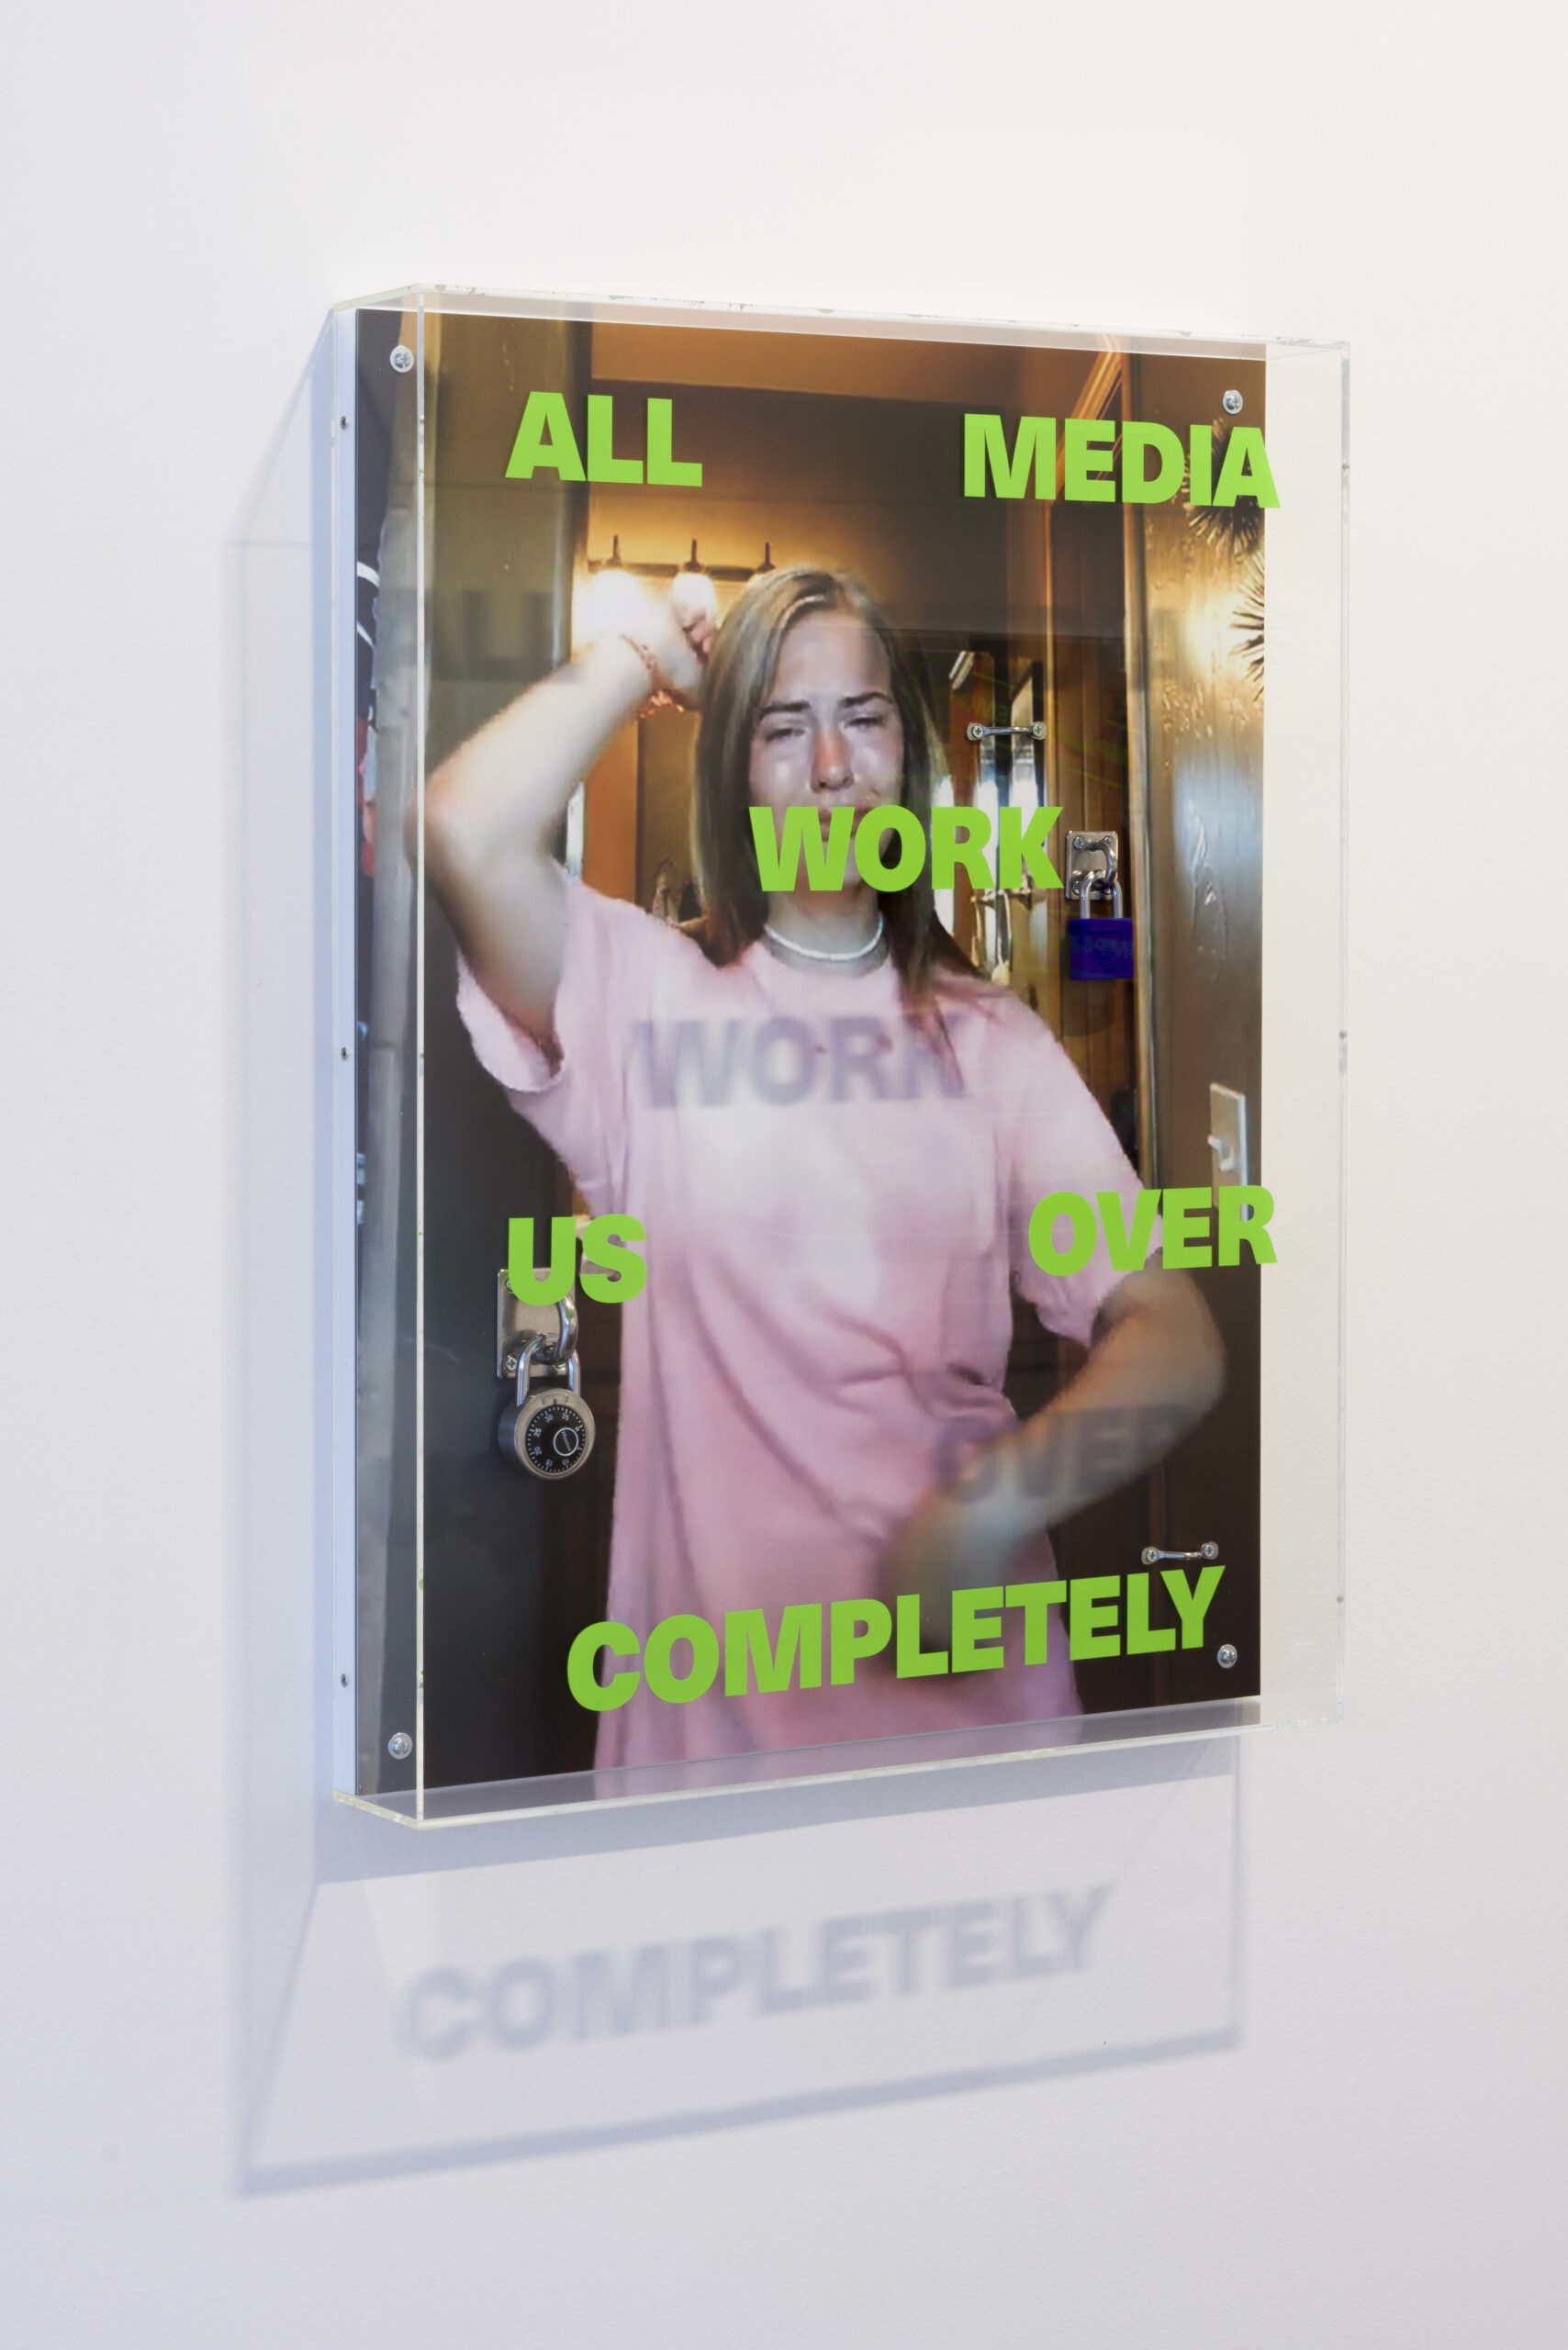 Documentation of an artwork by Dan Bourke. Portrait oriented, the photo print is incased in an acrylic frame. The image is a screen shot of a woman with blonde hair wearing a pink t-shirt dancing for a TikTok video while crying. Green vinyl text in all capitals is laid on the frame reading "ALL MEDIA WORK US OVER COMPLETELY"